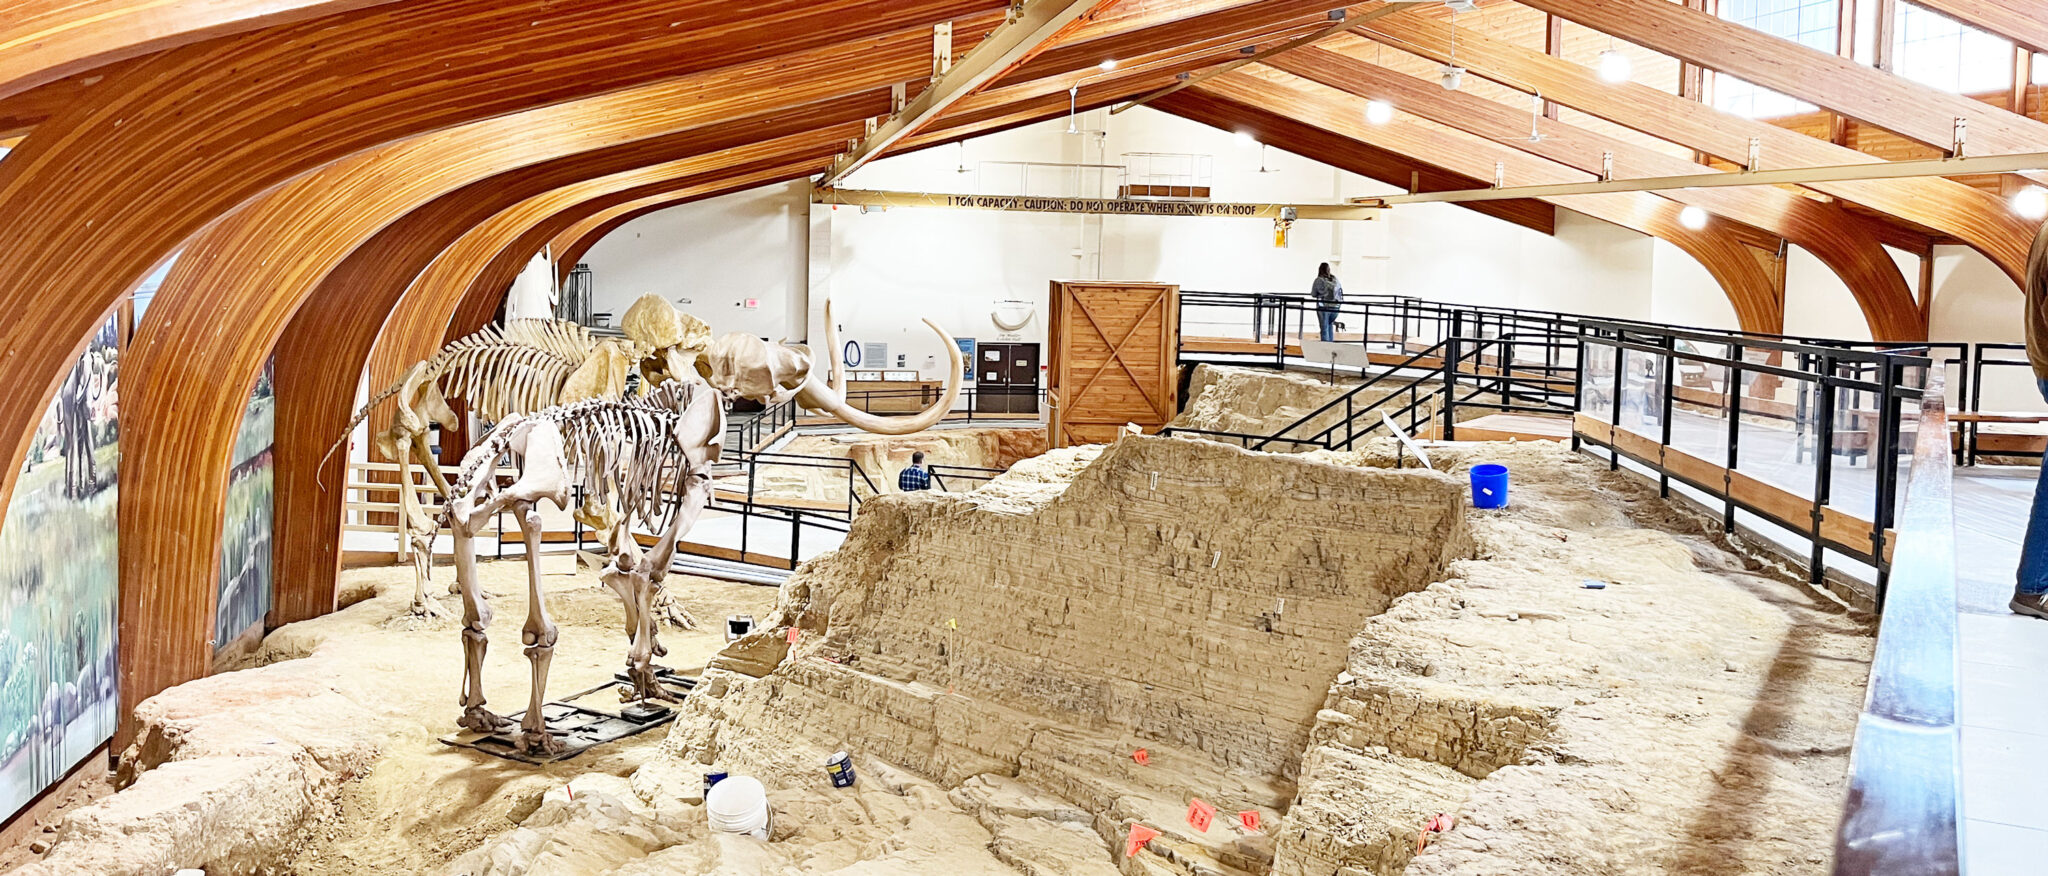 The Mammoth Paleontological Site